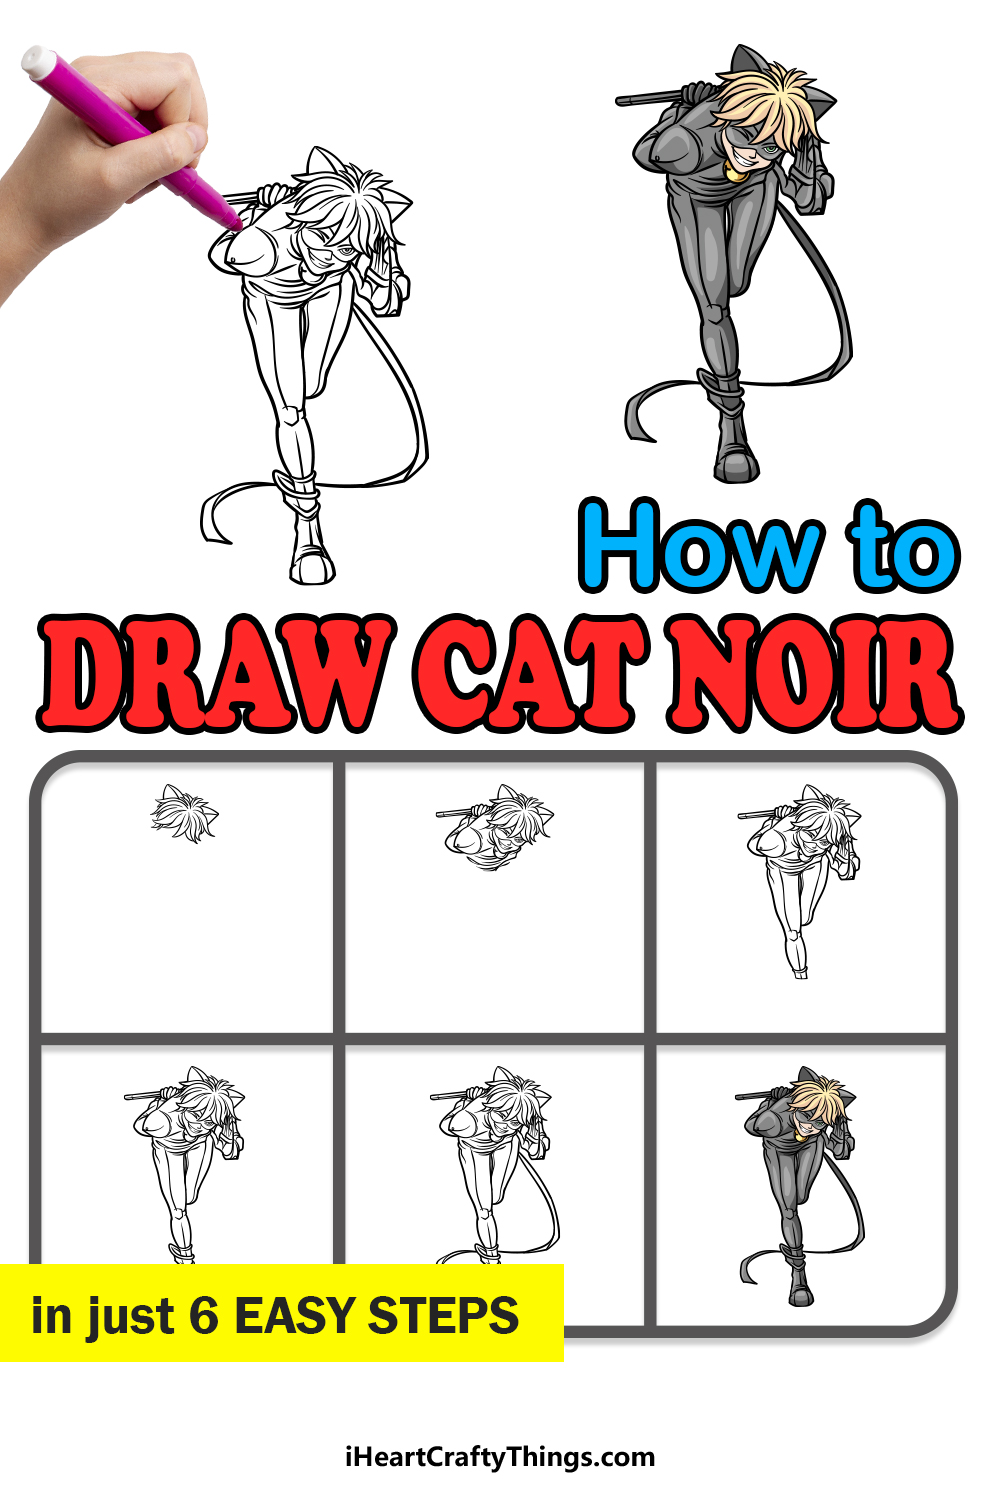 how to draw Cat Noir in 6 easy steps